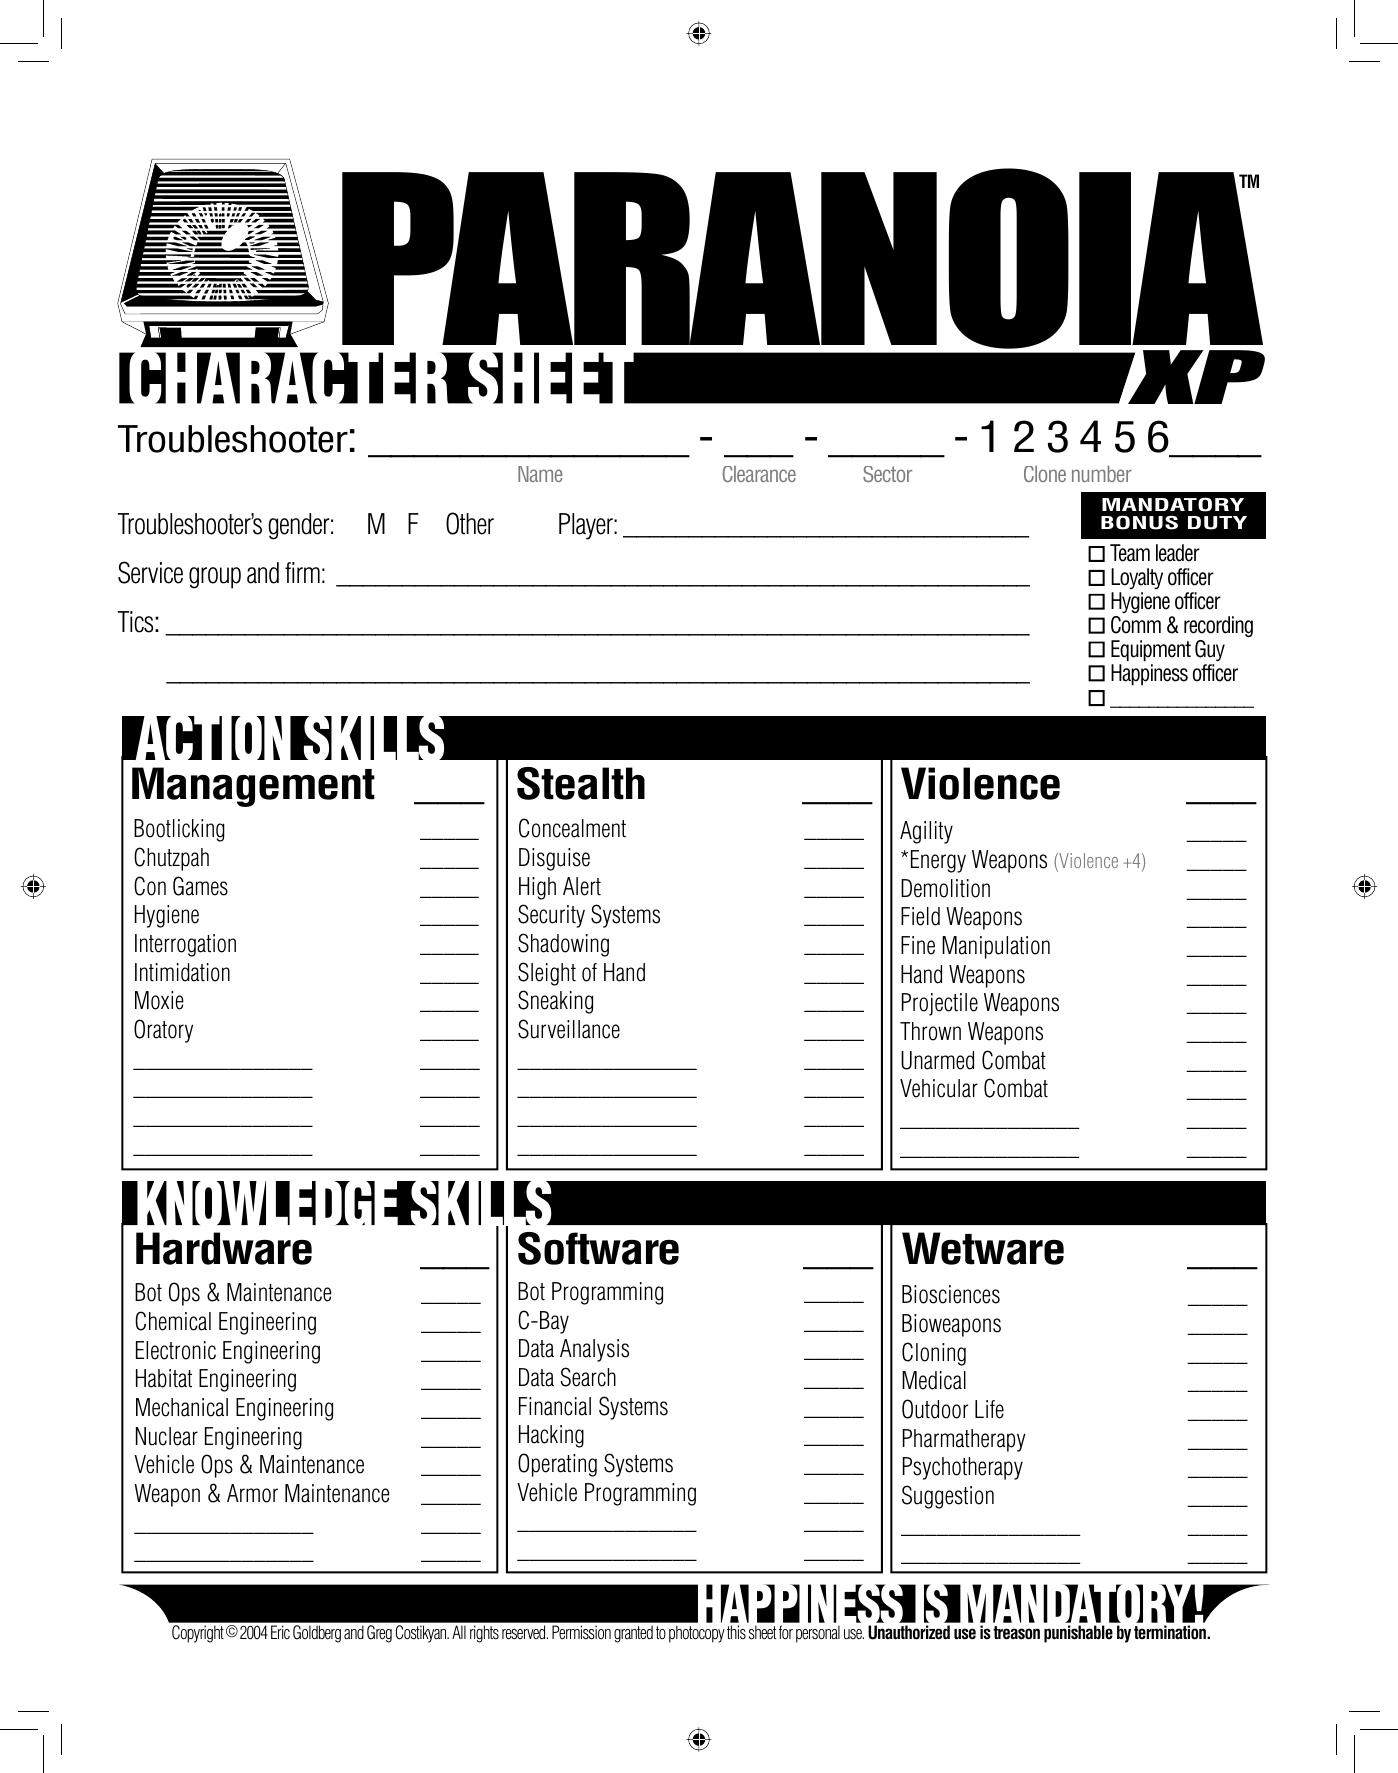 Paranoia00.indd